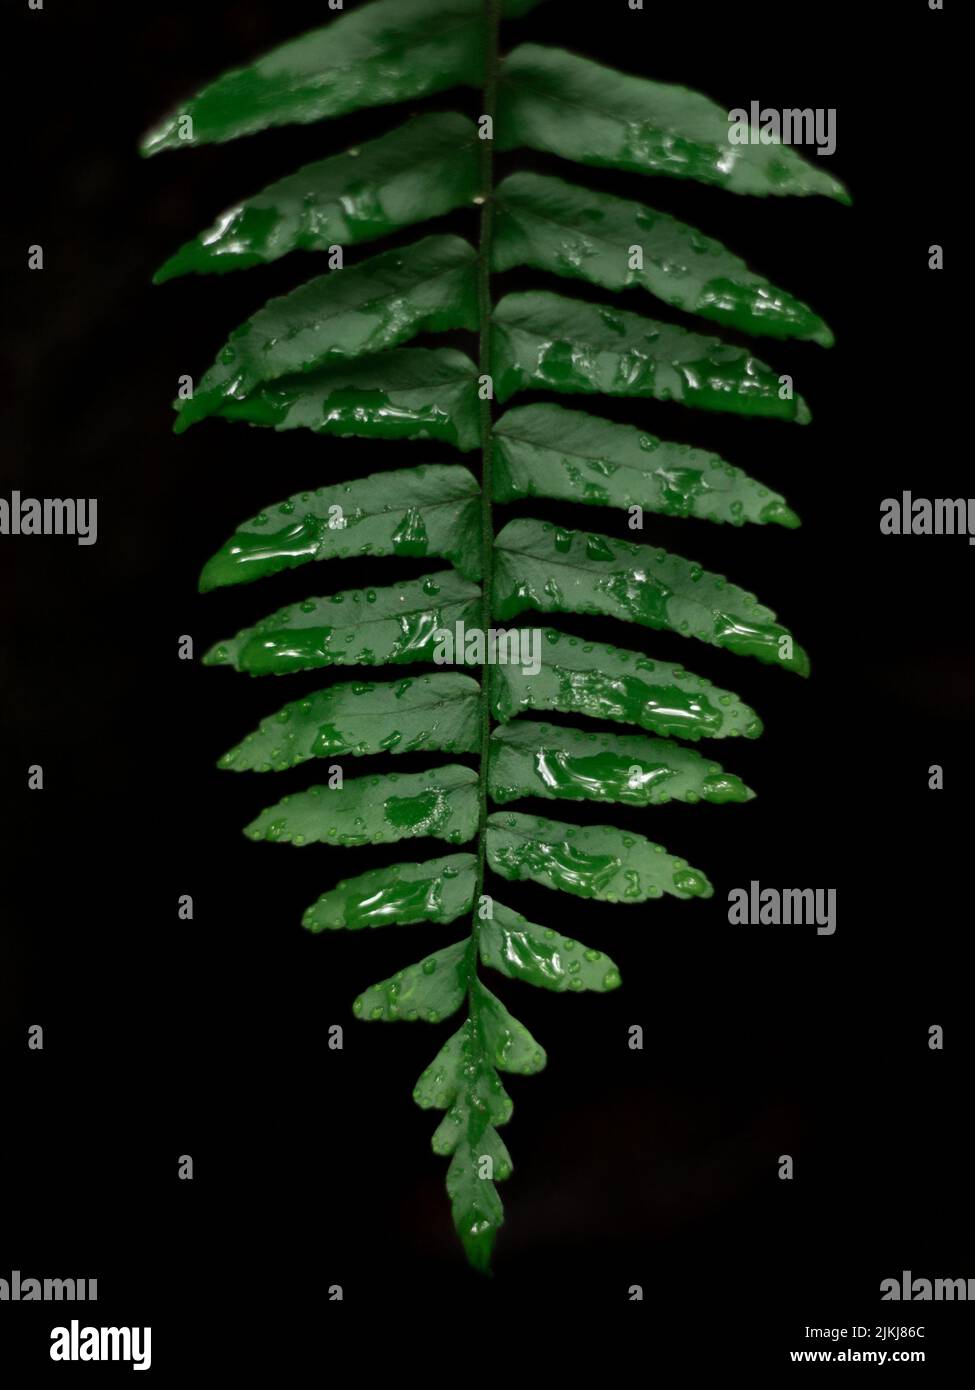 A vertical shot of water drops of dew or rain on a fern leaf isolated on a black background Stock Photo